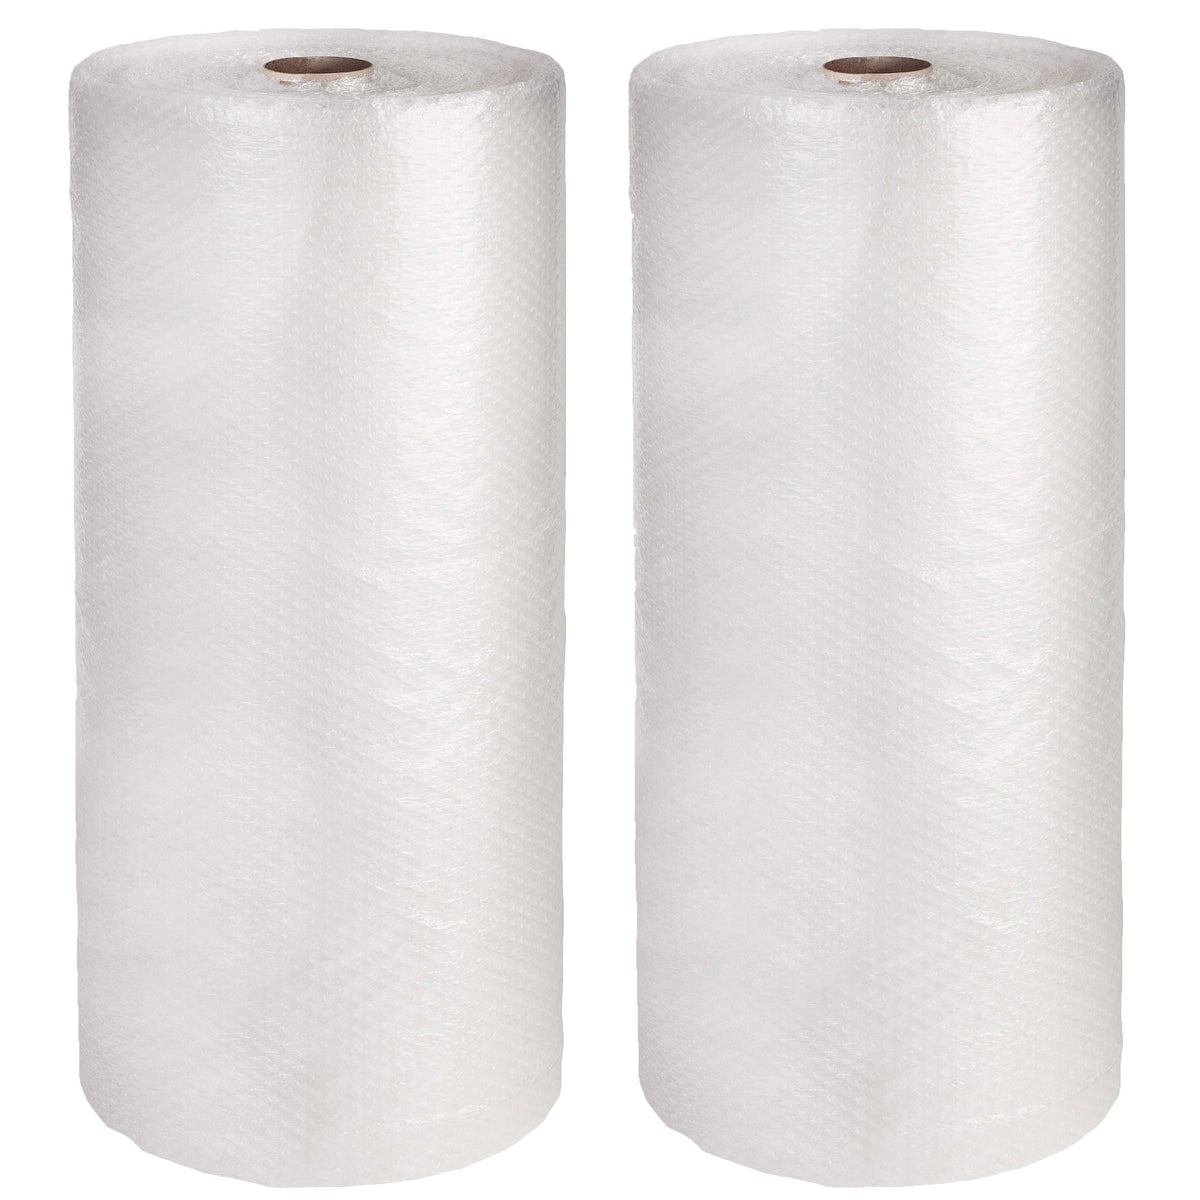 1.2 Metre bubble wrap - Made In Africa B2B